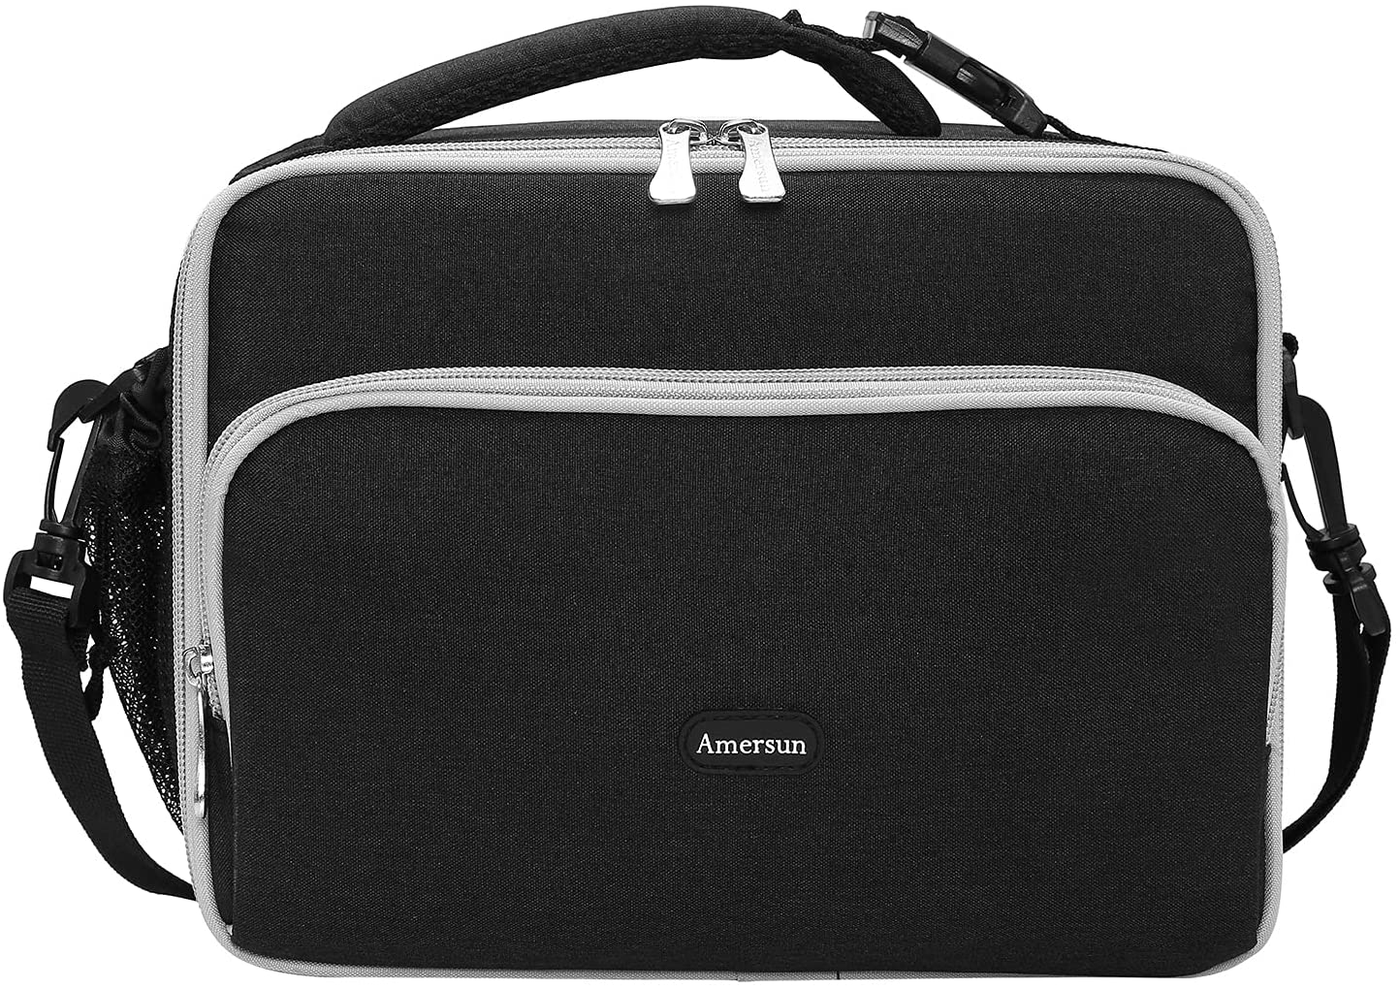 Amersun Lunch Bag for Kids - Padded Durable Insulated Lunch Box with Adjustable Shulder Strap & 2 Pockets for Girls Boys Toddler School,Thermal Freezable Lunch Cooler Keep Food Warm Cold Fresh,Black